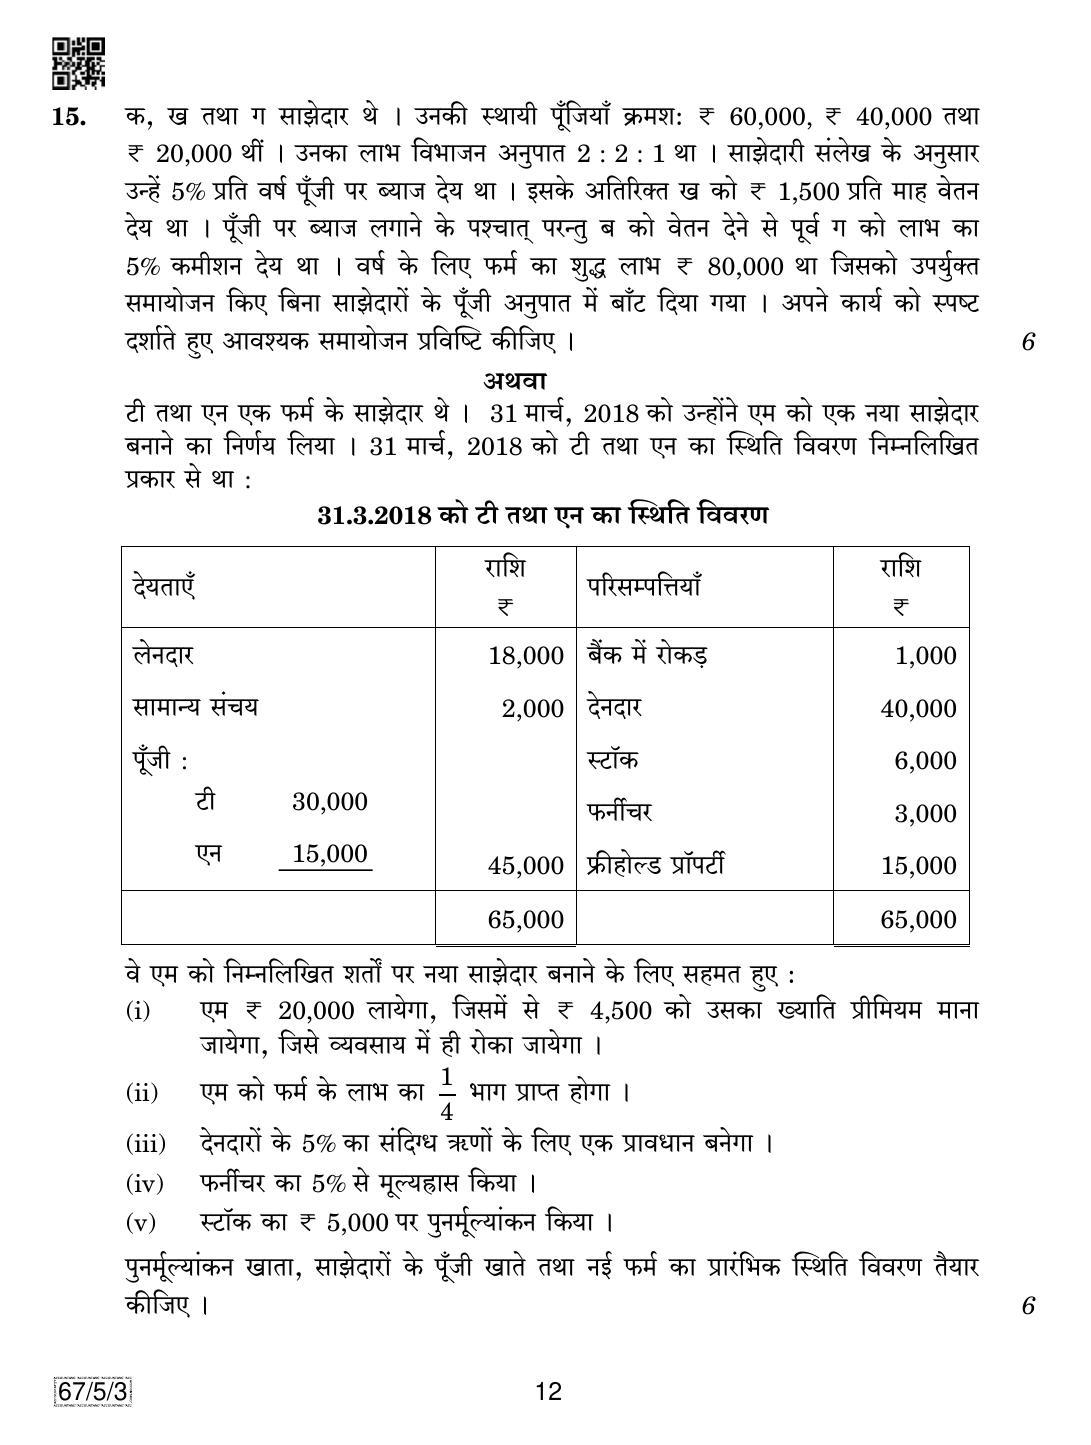 CBSE Class 12 67-5-3 Accountancy 2019 Question Paper - Page 12